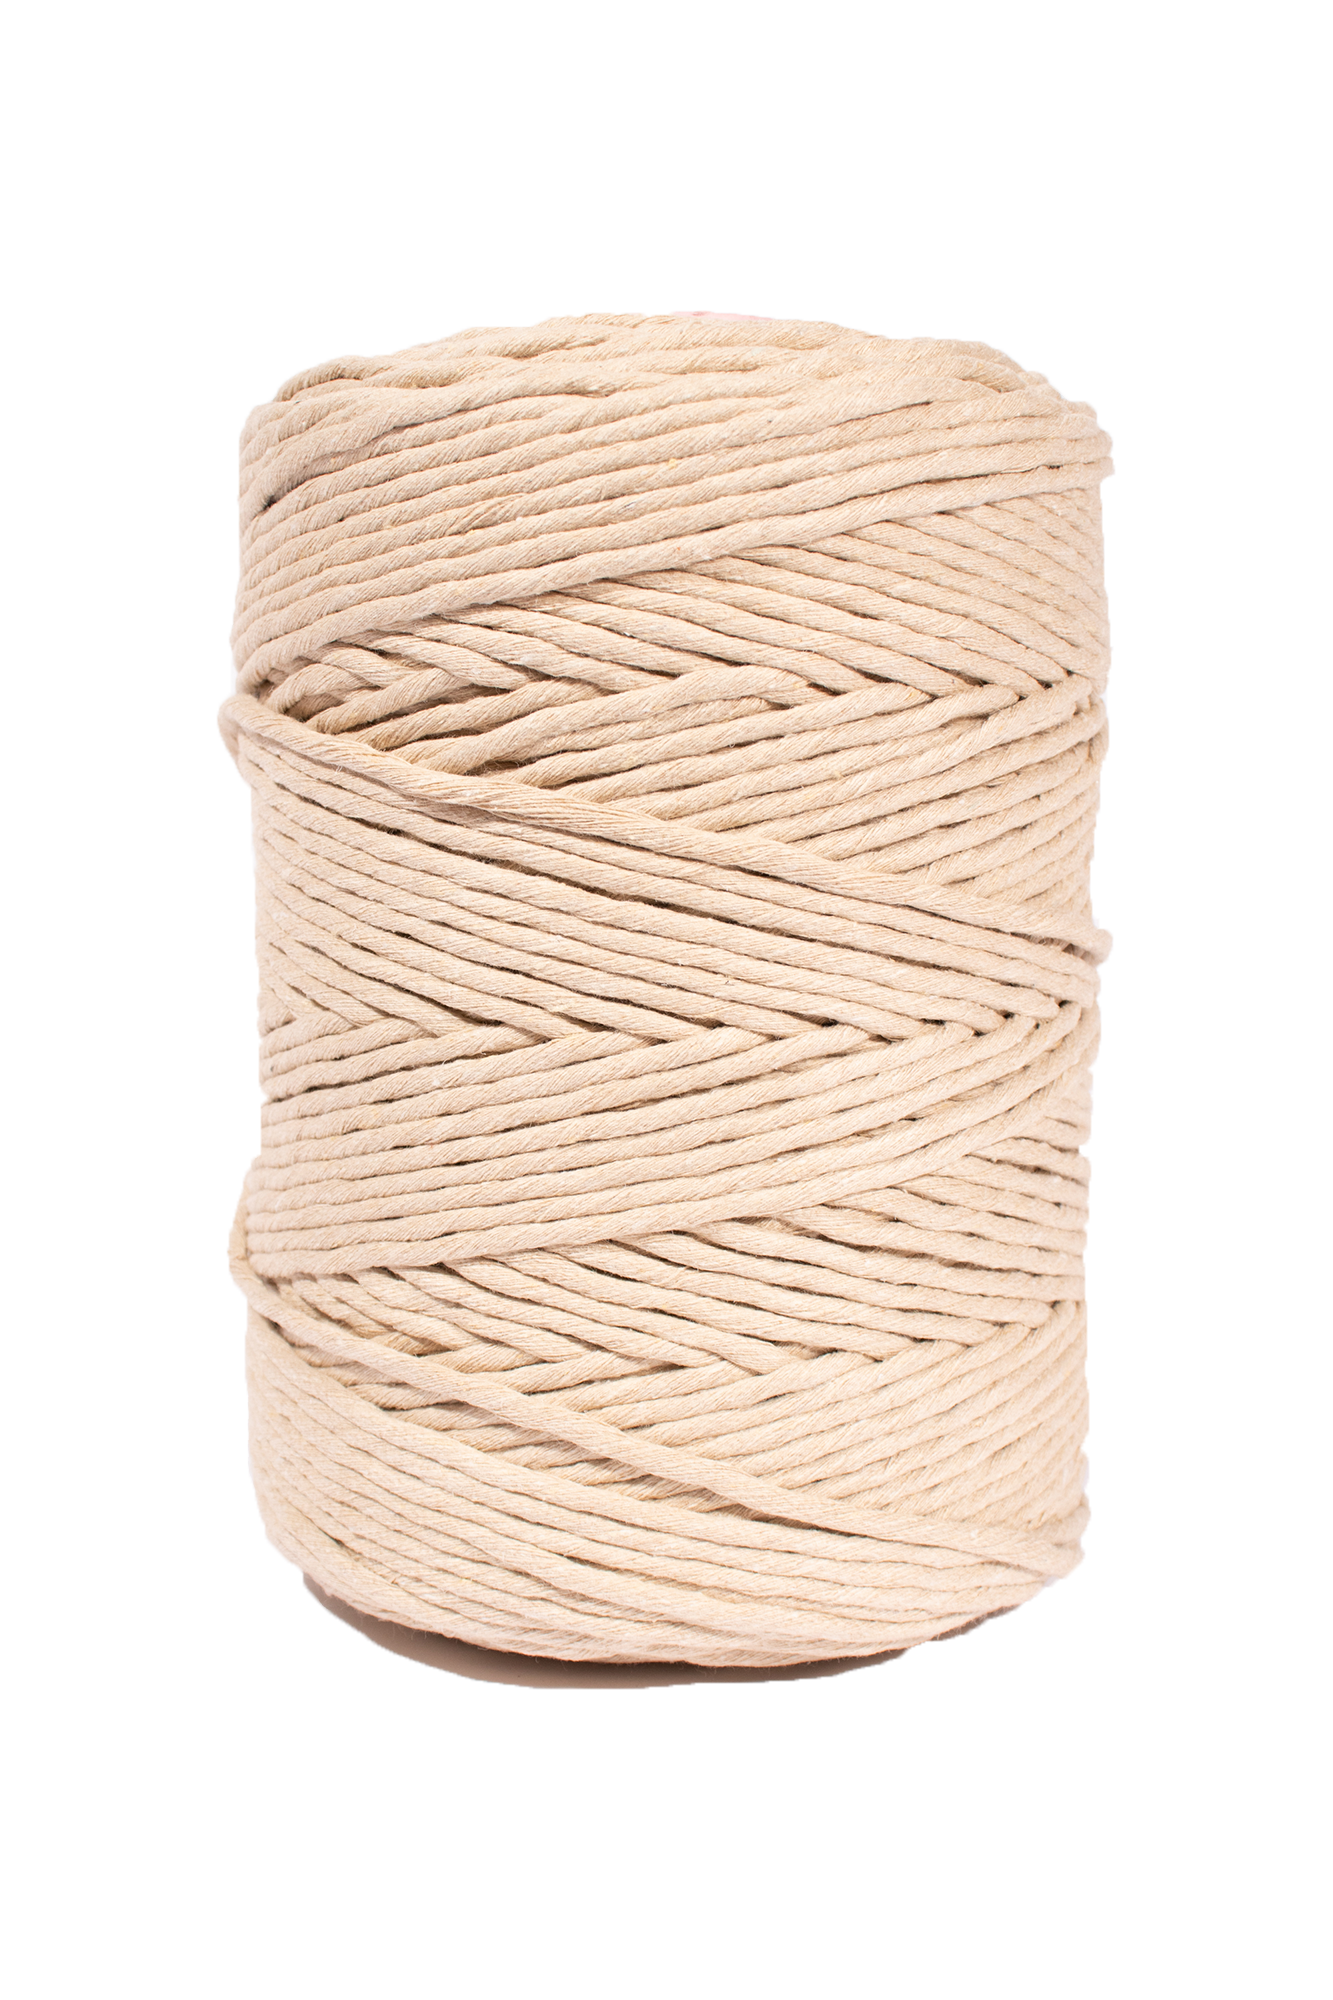 Giant Spool of Twine, Macrame String, Extra Thick Cord Twine String, Plant Hanger Rope, Nautical Decor, Macrame Cord